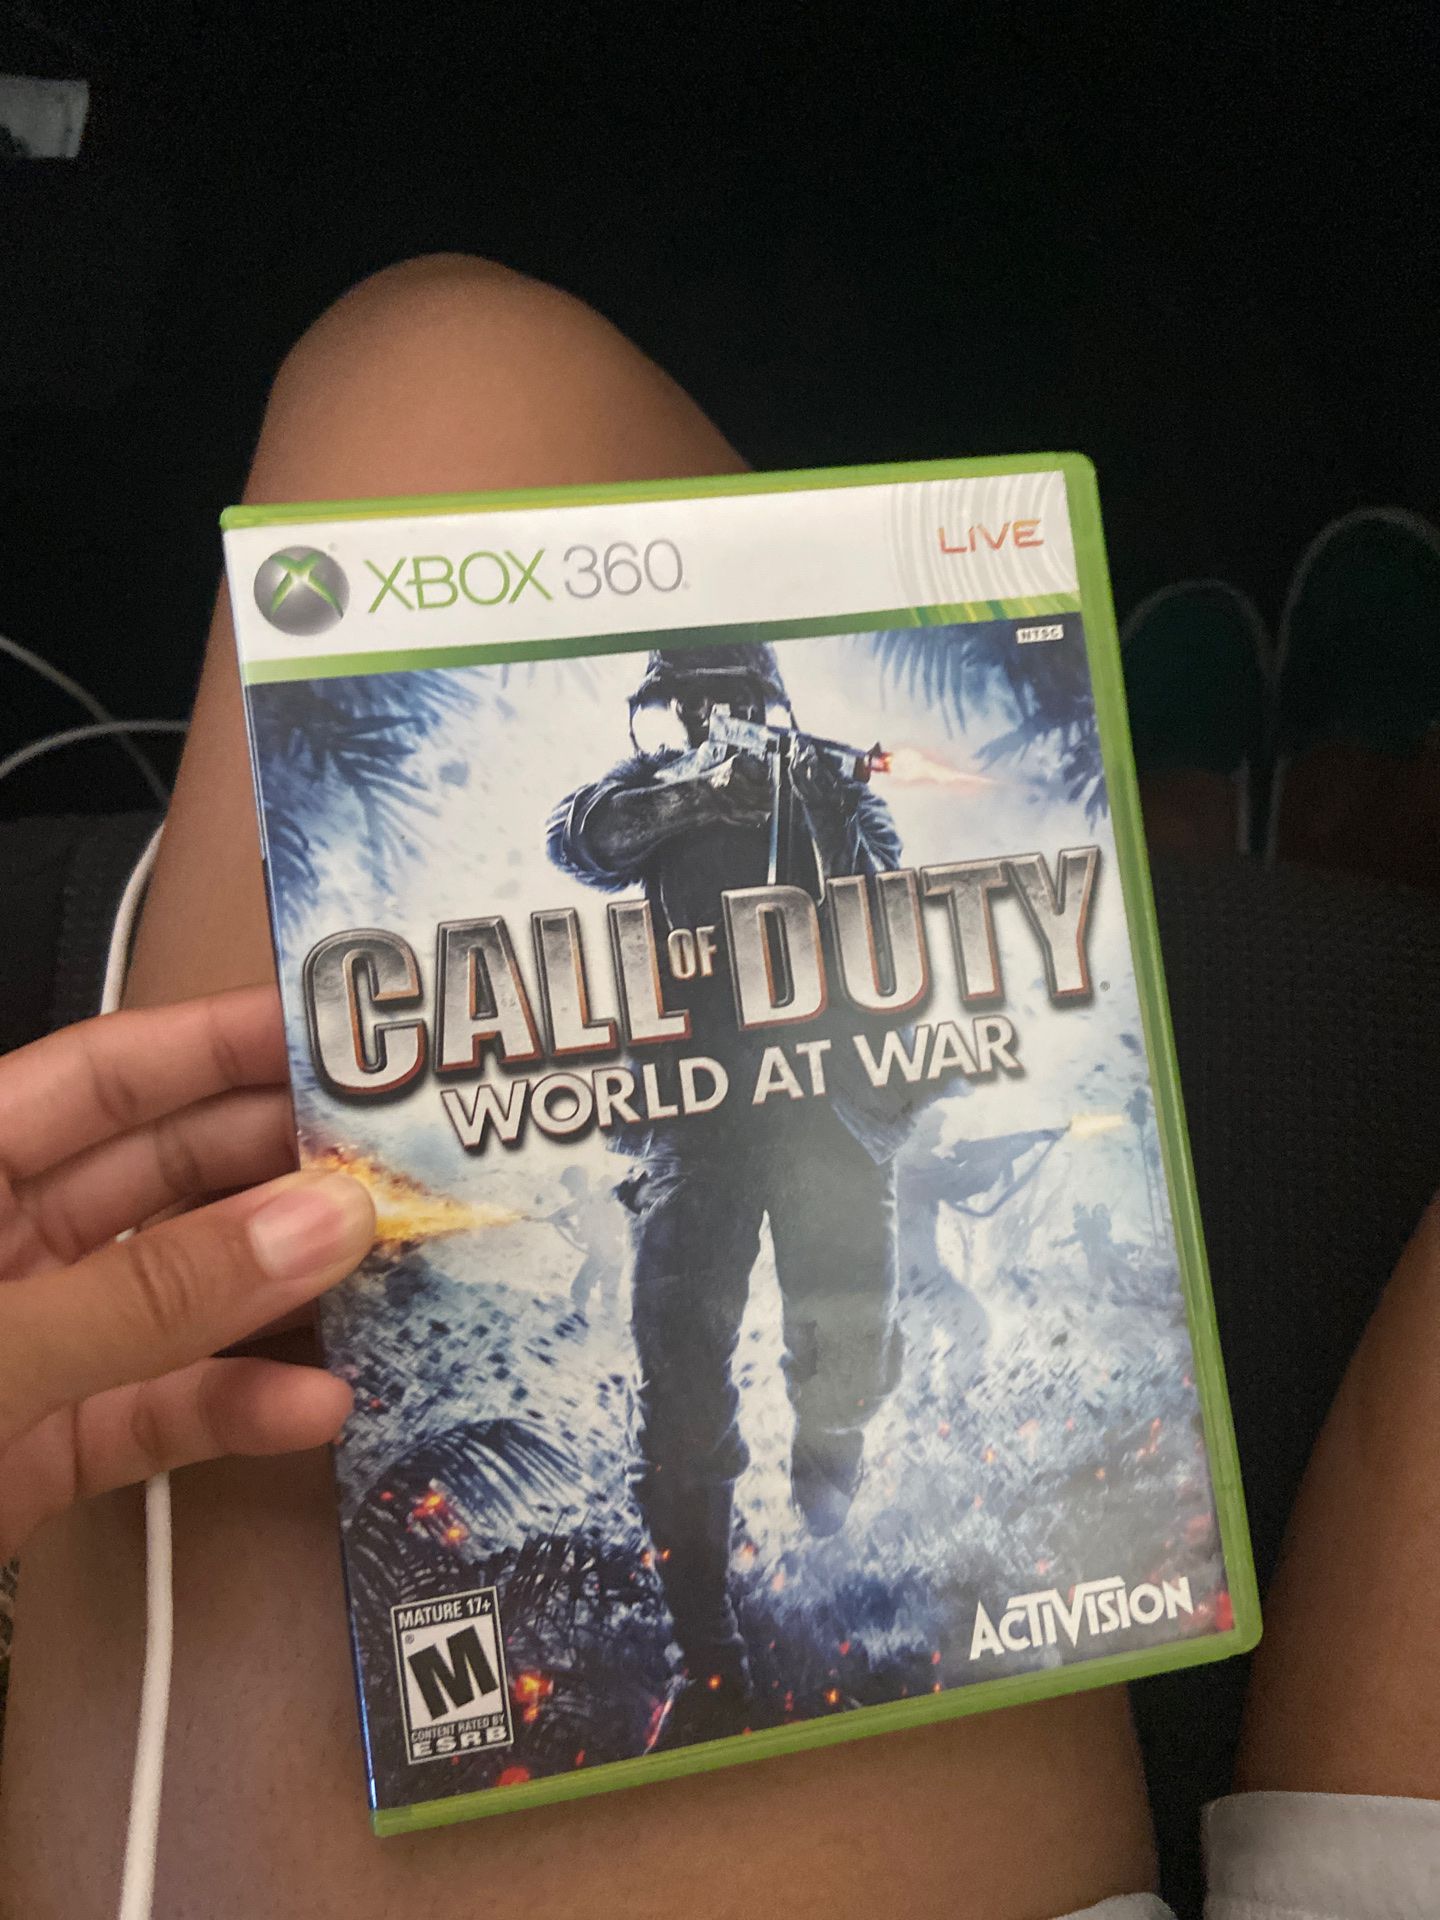 Call of duty world at war Xbox 360 disc